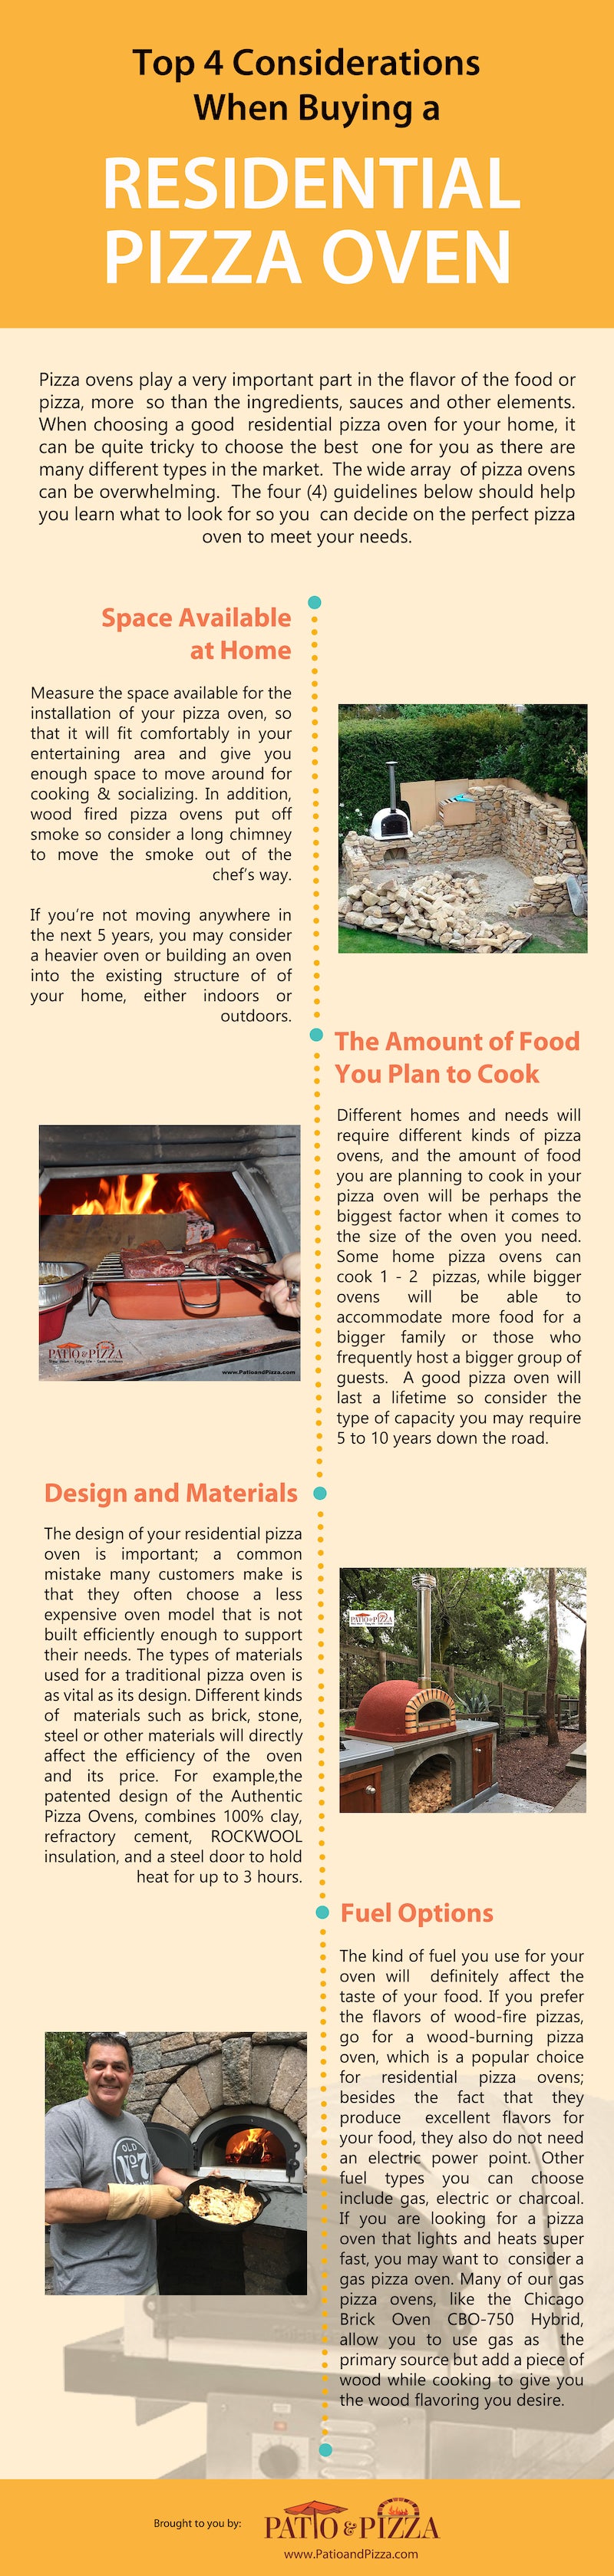 Infographic on buying a pizza oven